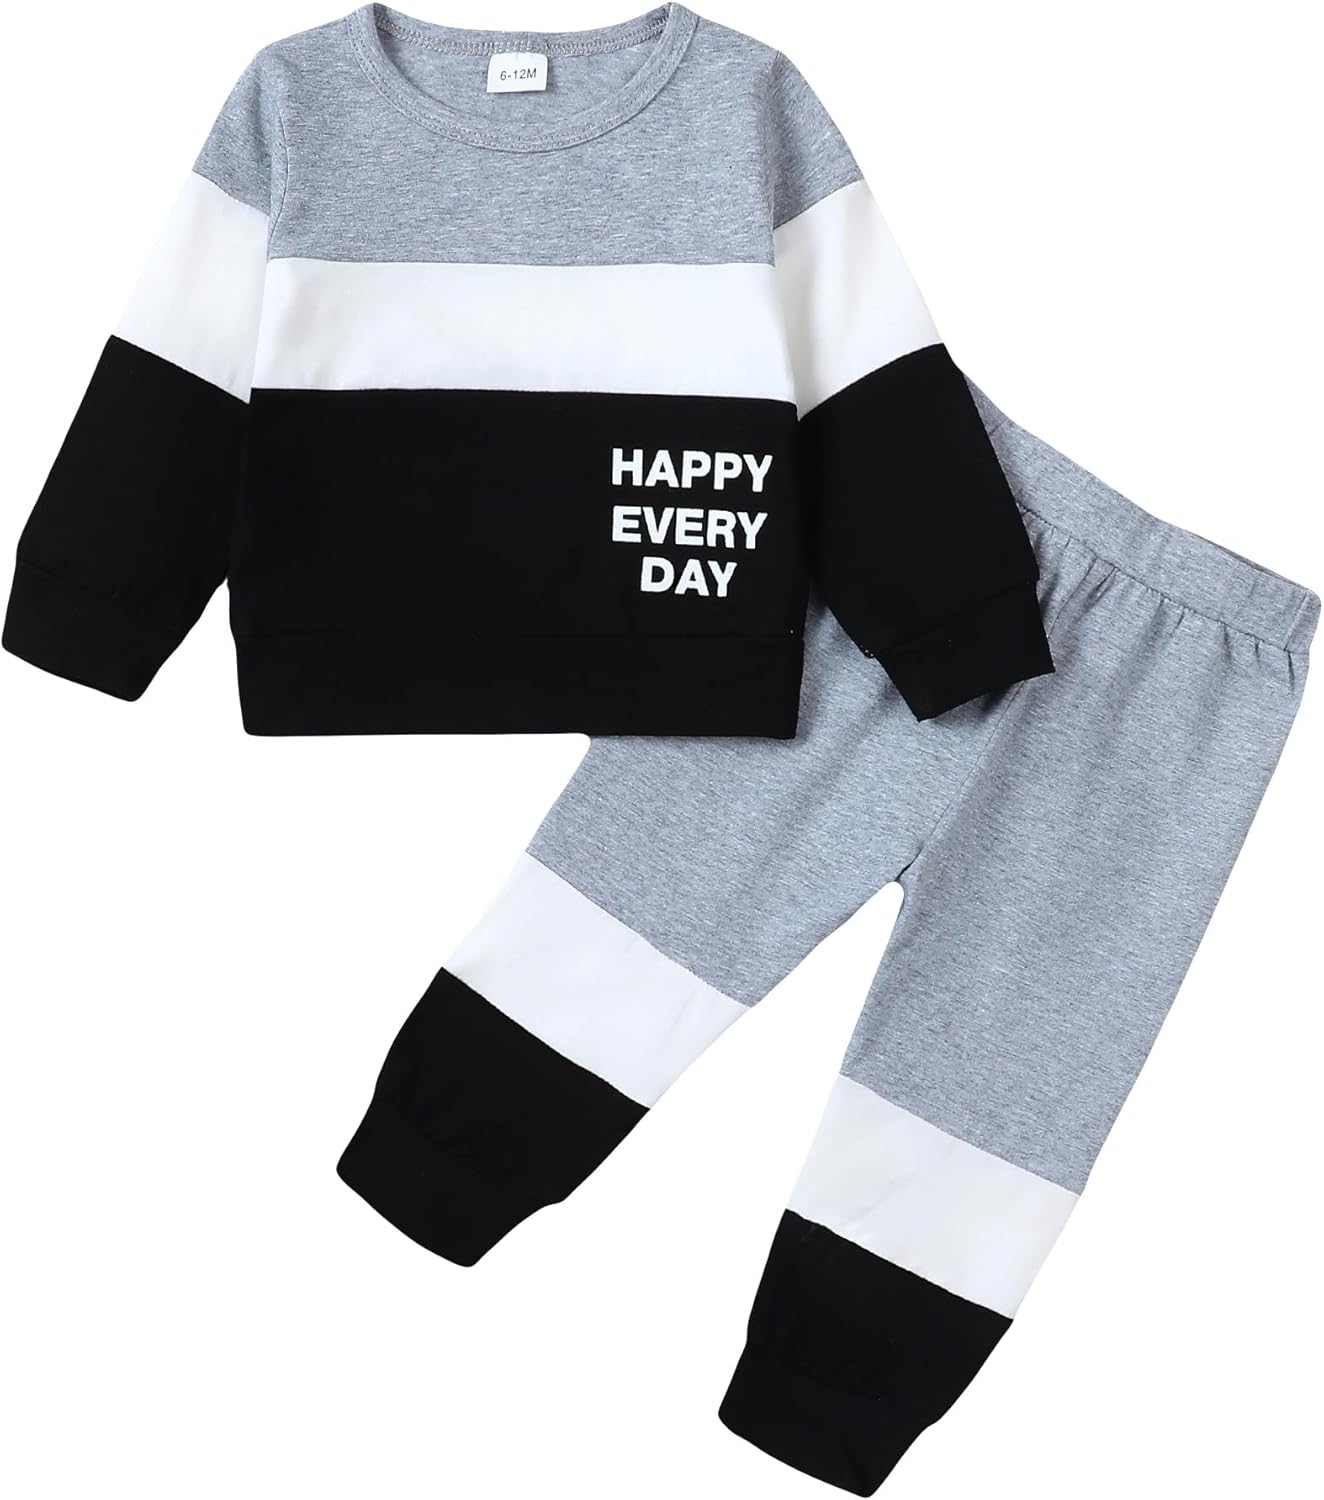 Baby Boy Clothes Toddler Fall Winter Outfits Crewneck Sweatshirt Pullover Tops Jogger Pants Set Spring Fall Winter